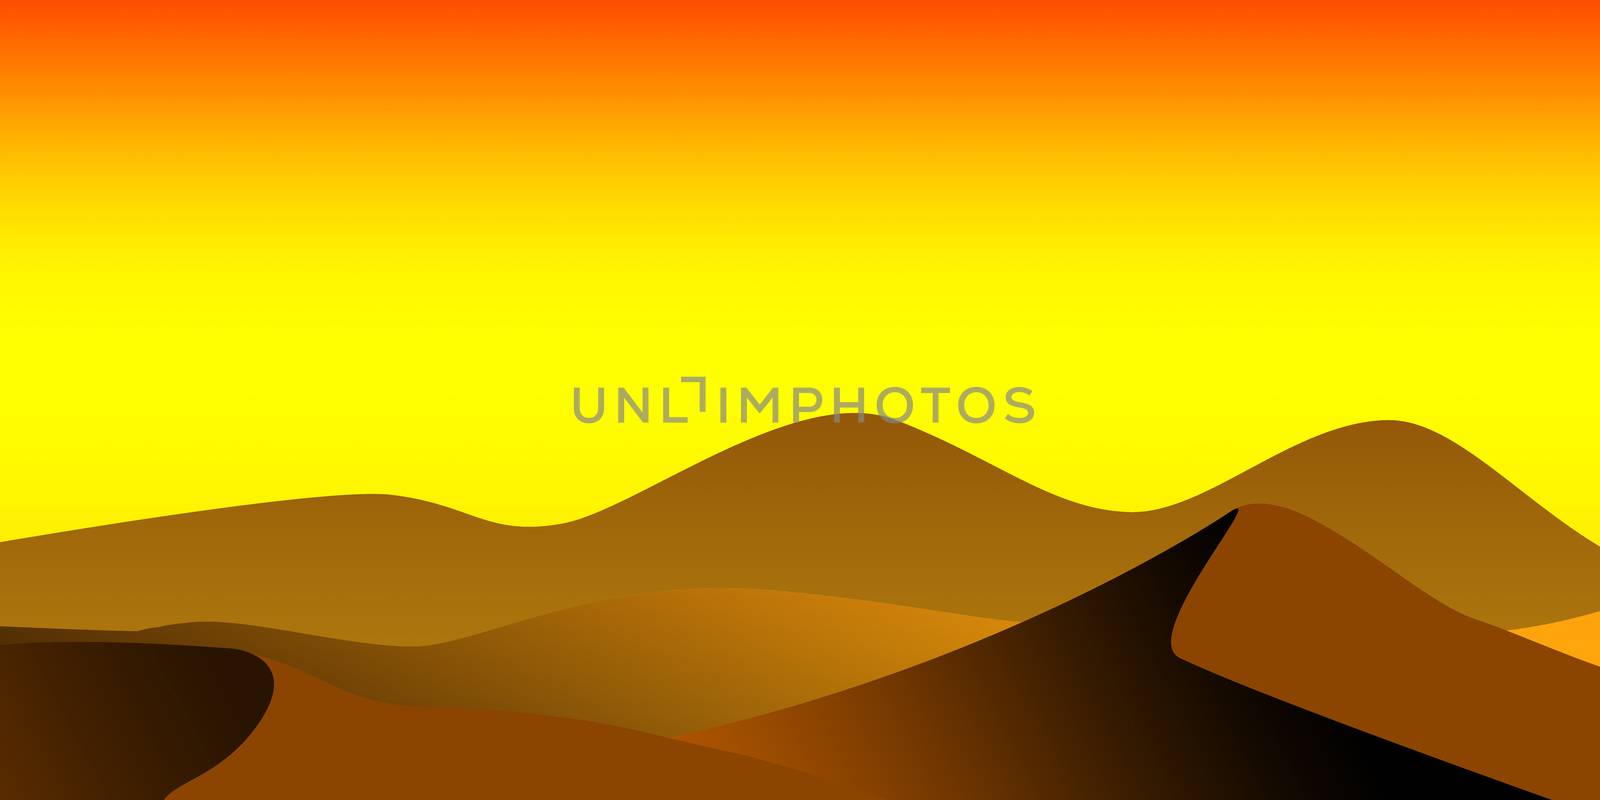 Colored minimalistic desert landscape by tang90246